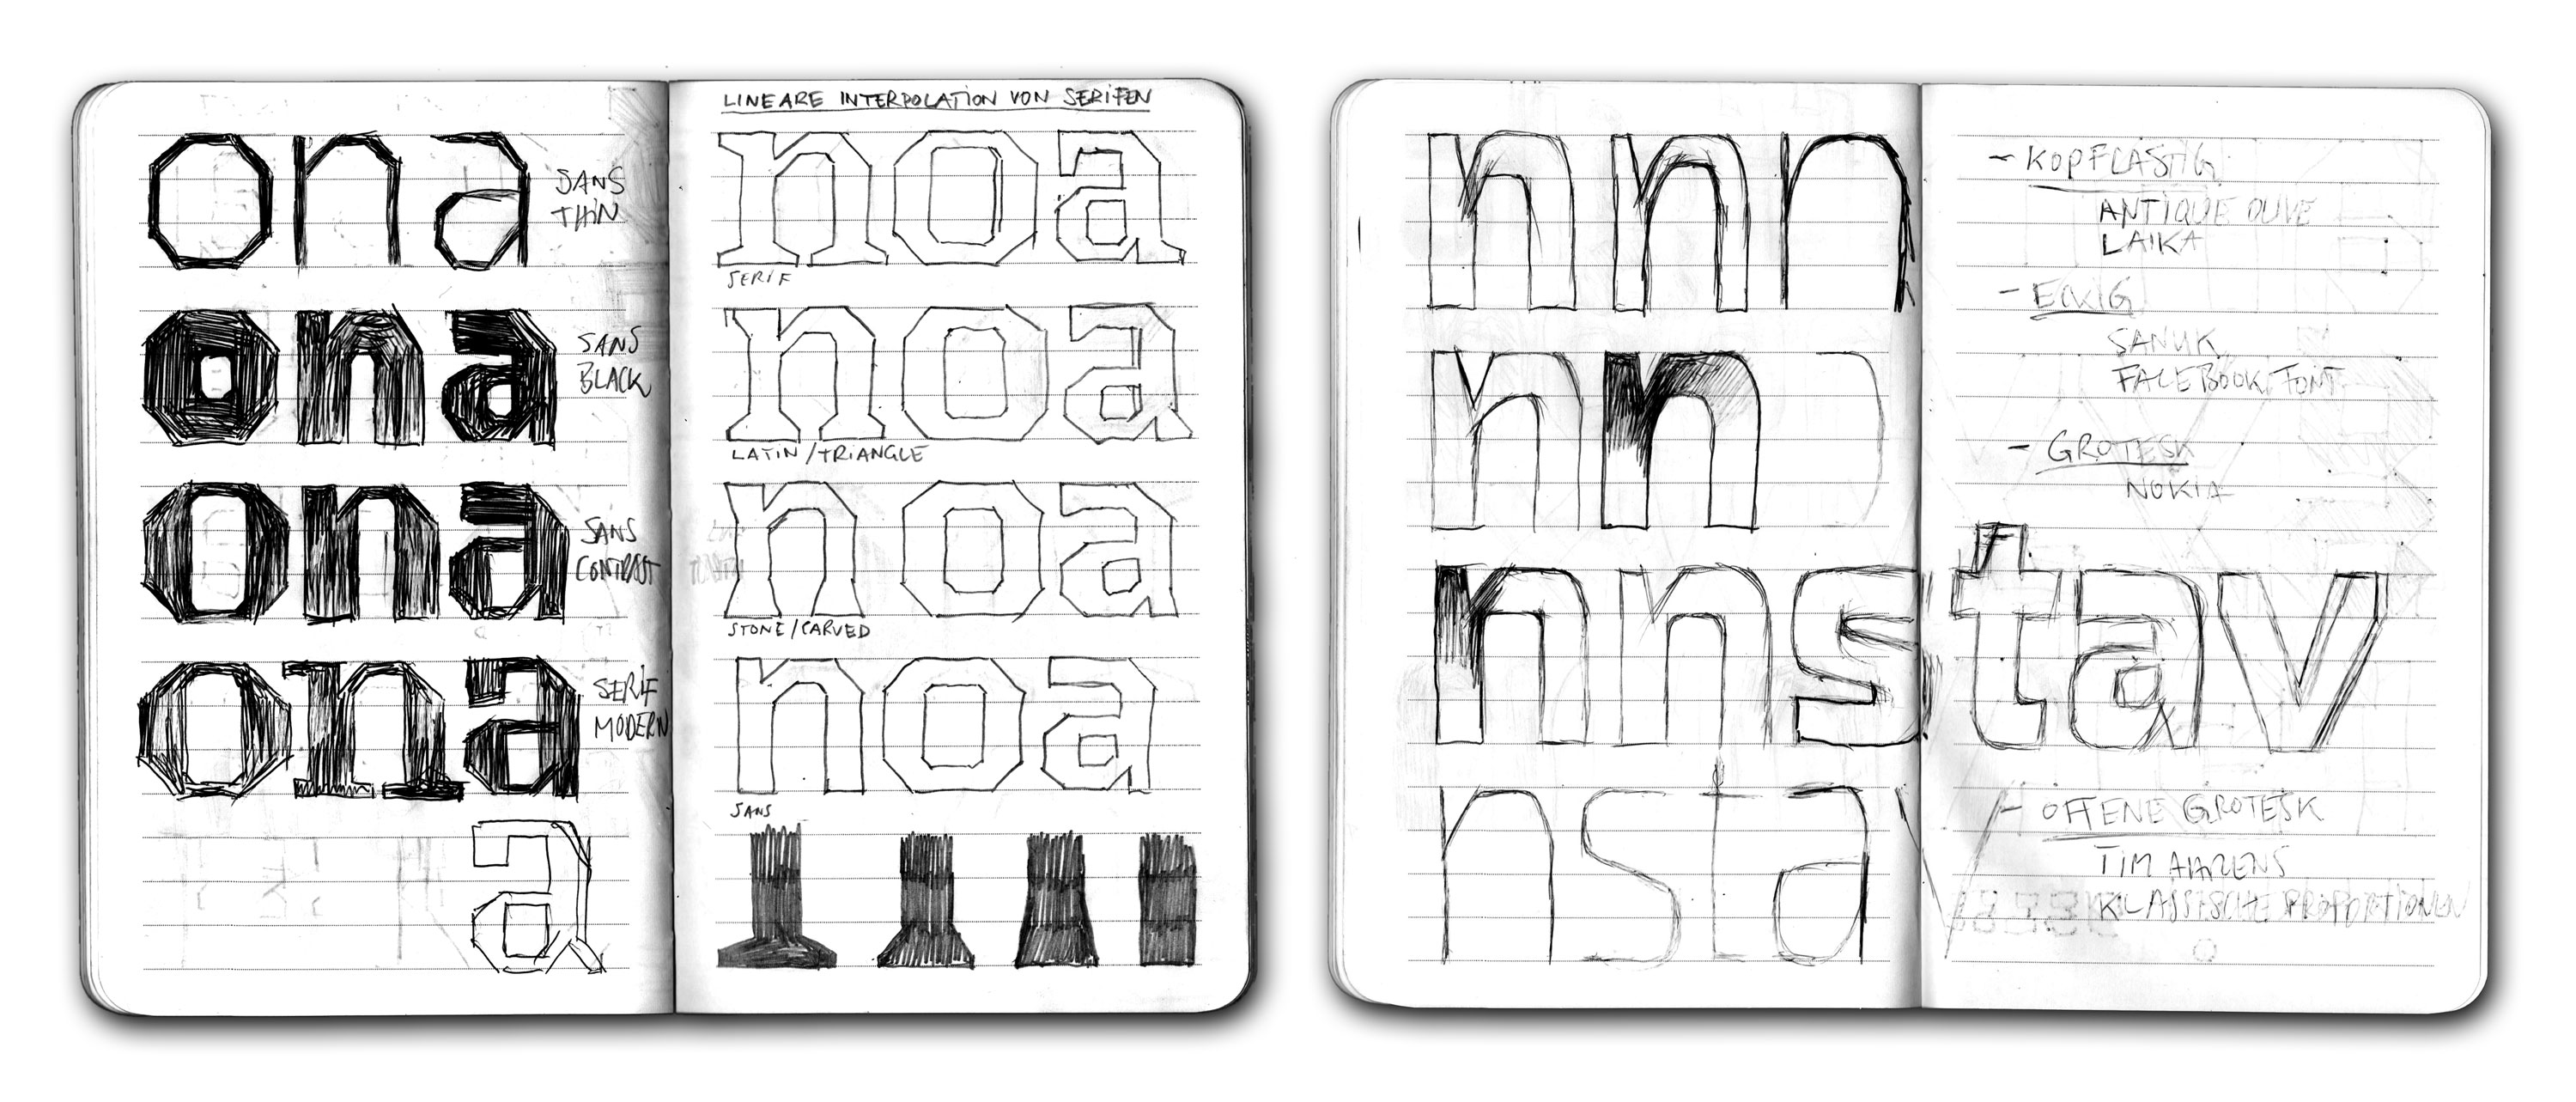 Research scetches for Turbine typeface